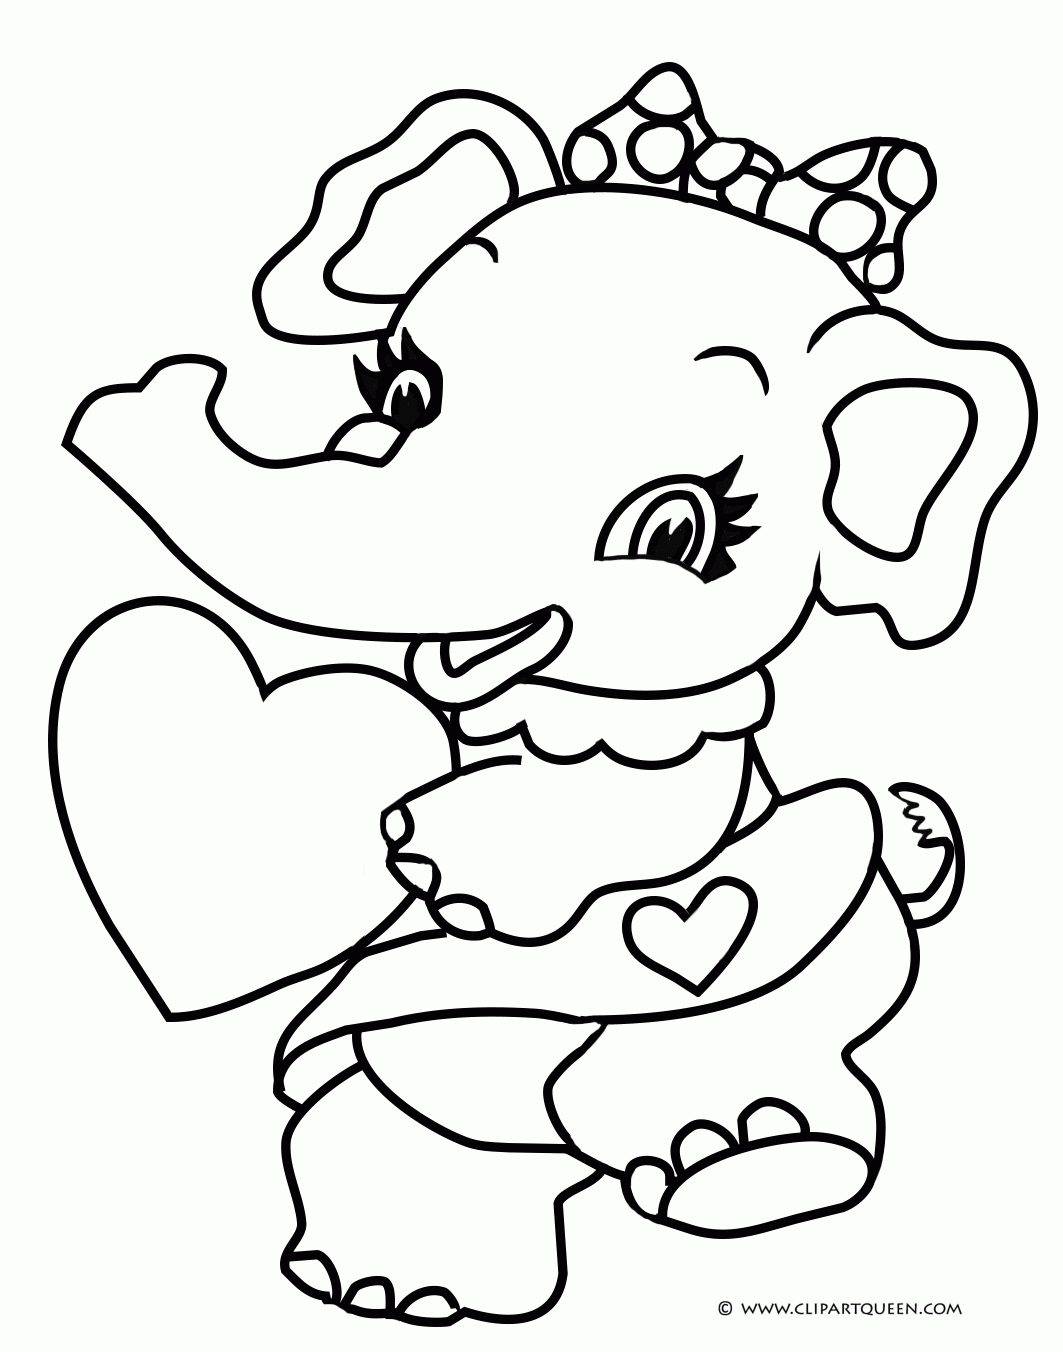 11 Valentine's Day coloring pages